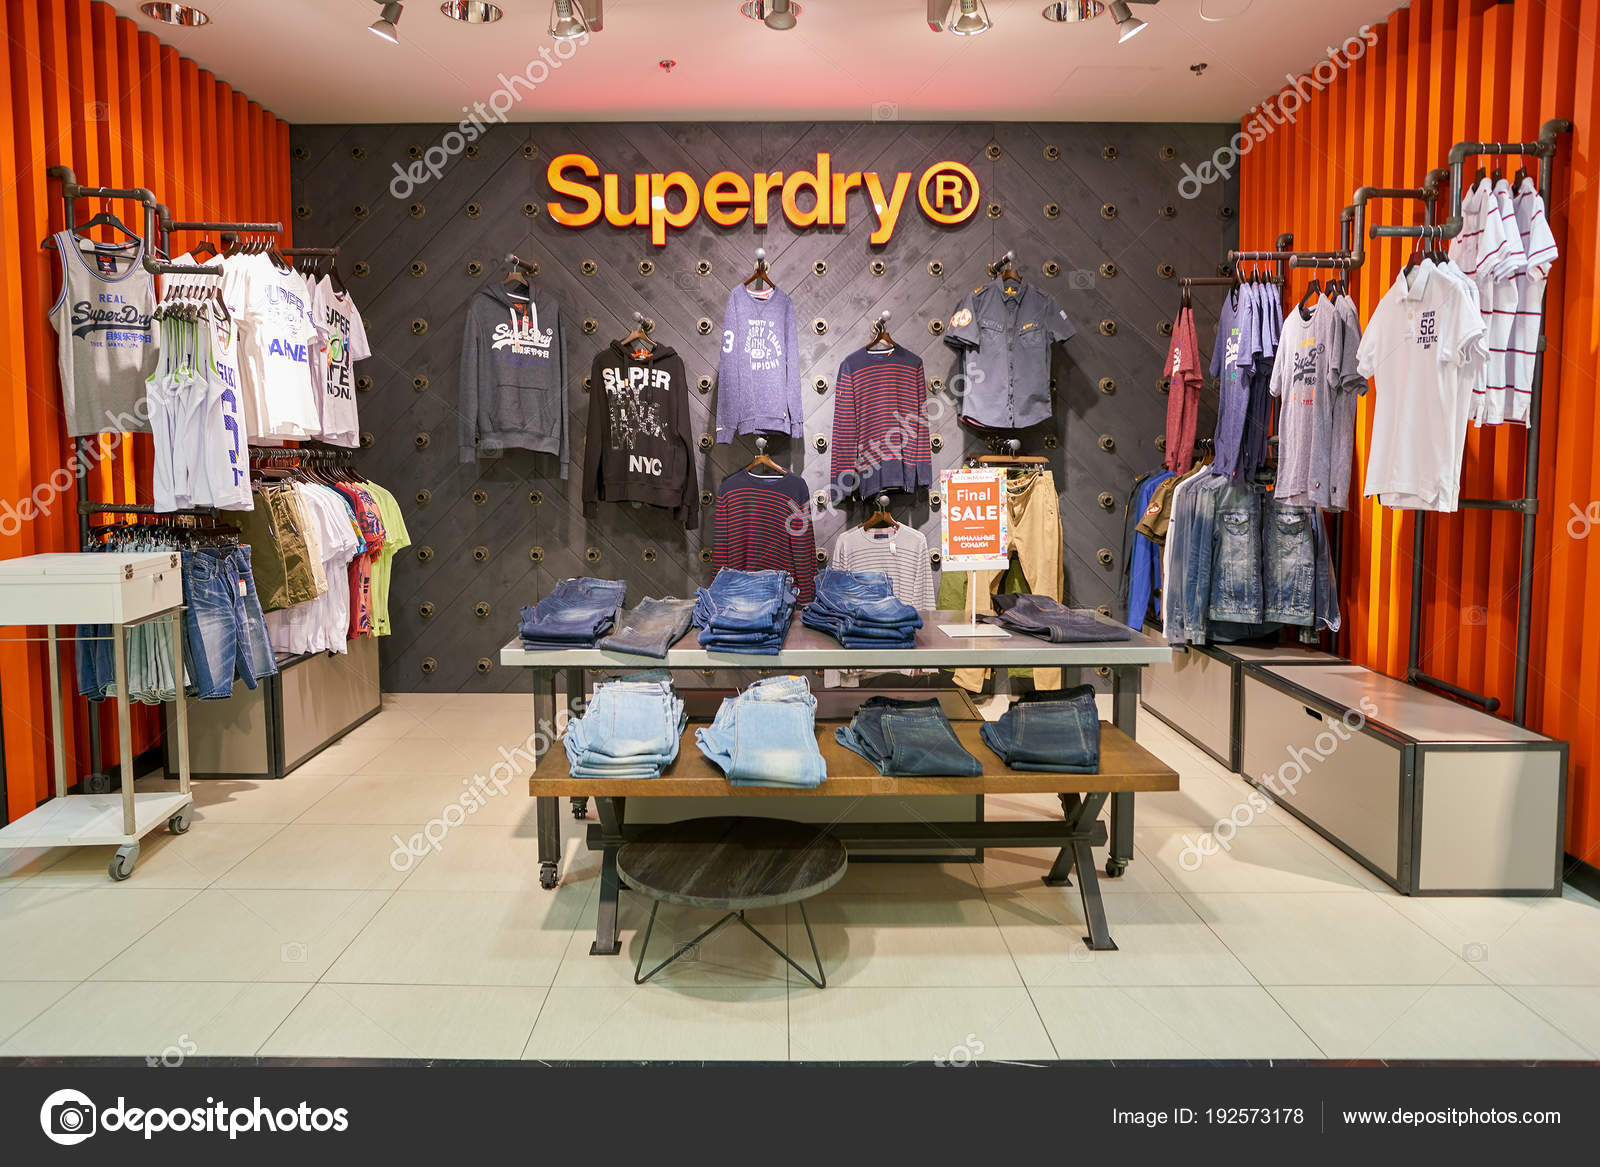 Superdry Stock Photos, Royalty Free Superdry Images